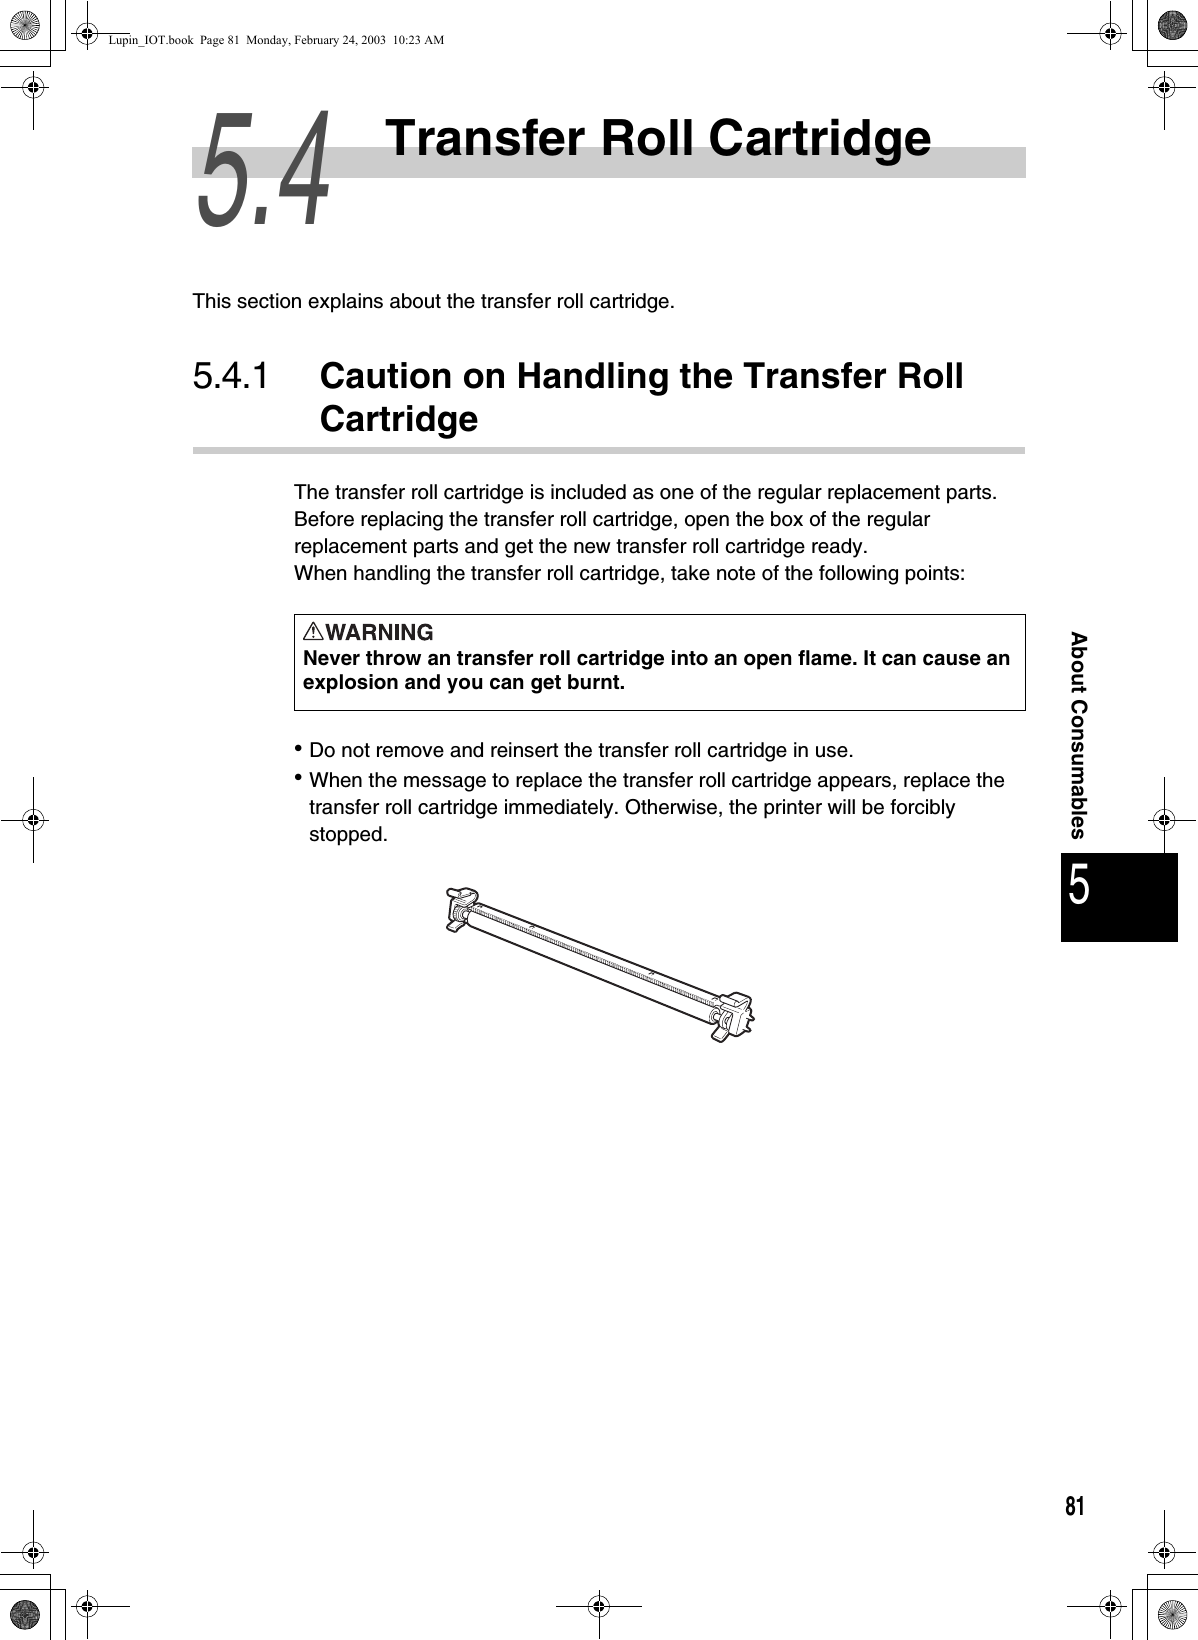 815About Consumables5.4Transfer Roll CartridgeThis section explains about the transfer roll cartridge. 5.4.1 Caution on Handling the Transfer Roll CartridgeThe transfer roll cartridge is included as one of the regular replacement parts. Before replacing the transfer roll cartridge, open the box of the regular replacement parts and get the new transfer roll cartridge ready. When handling the transfer roll cartridge, take note of the following points:zDo not remove and reinsert the transfer roll cartridge in use. zWhen the message to replace the transfer roll cartridge appears, replace the transfer roll cartridge immediately. Otherwise, the printer will be forcibly stopped. Never throw an transfer roll cartridge into an open flame. It can cause an explosion and you can get burnt.Lupin_IOT.book  Page 81  Monday, February 24, 2003  10:23 AM